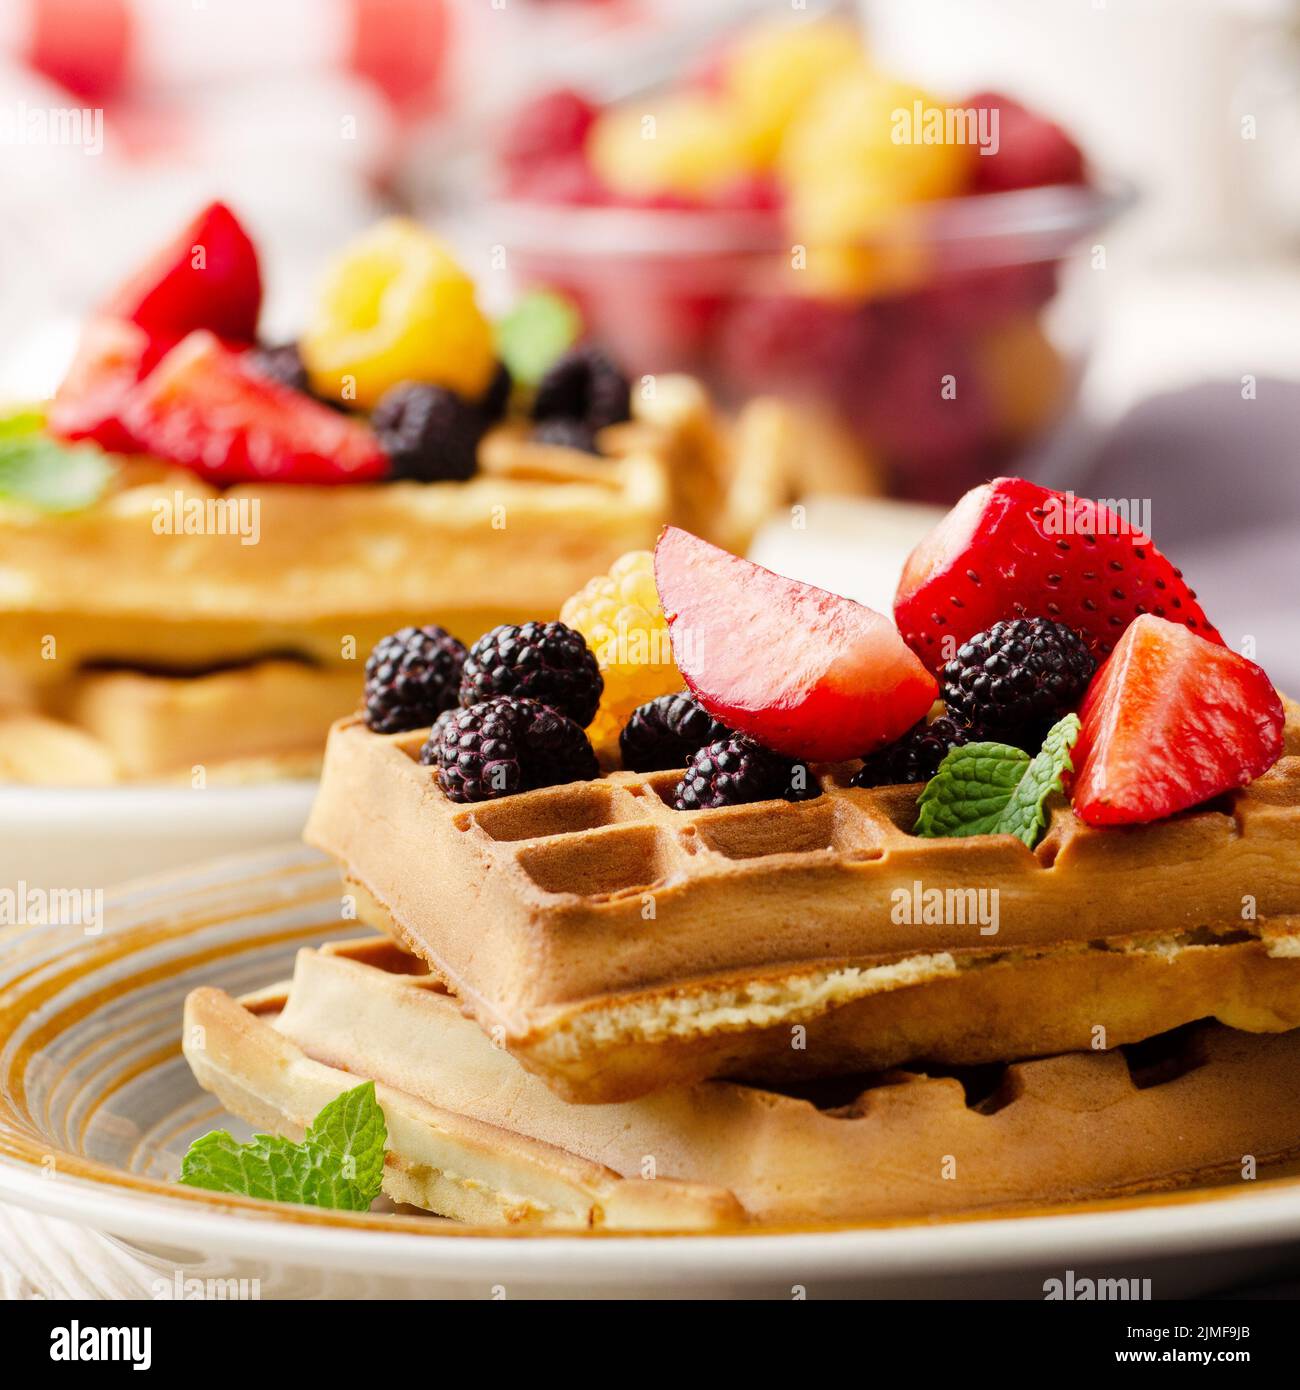 CLoseup view at belgian waffles served with strawberries and blackberries on kitchen table Stock Photo